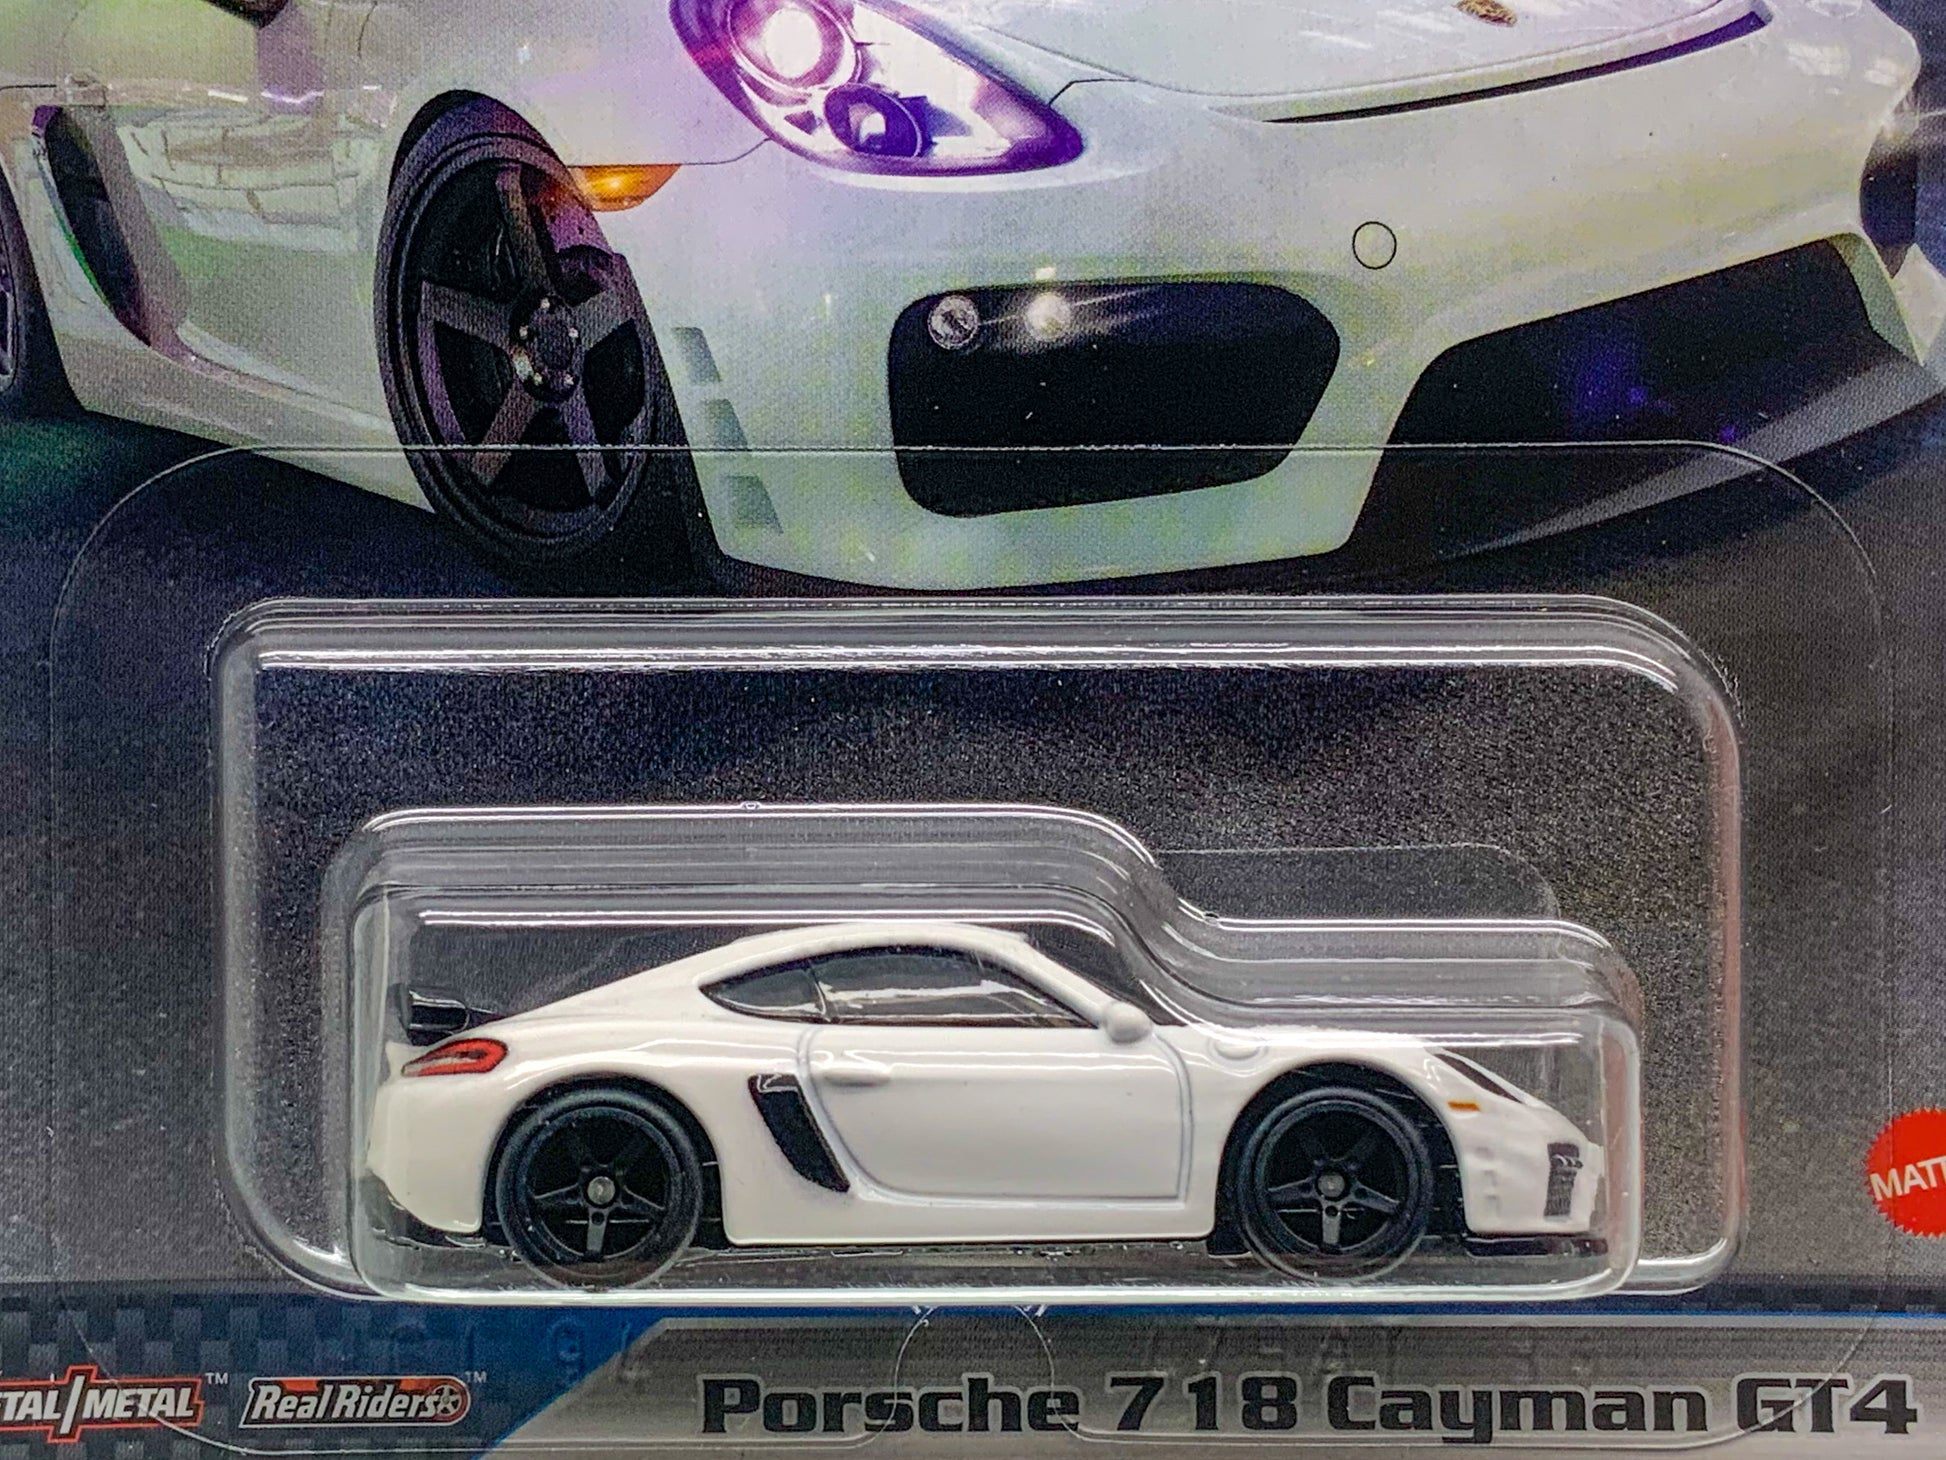 Buy at www.tatoyshop.com 2023 Hot Wheels Premium Fast & Furious Series  2023 Hot Wheels Premium Fast & Furious Porsche 718 Cayman GT4 4/5  Number 4 from the set of 5 Fast & Furious Series Premium Real Riders Metal Mattel HNW46 Shop Now   Mr Toys Kmart Target Big W  International and Domestic delivery by Australia Post